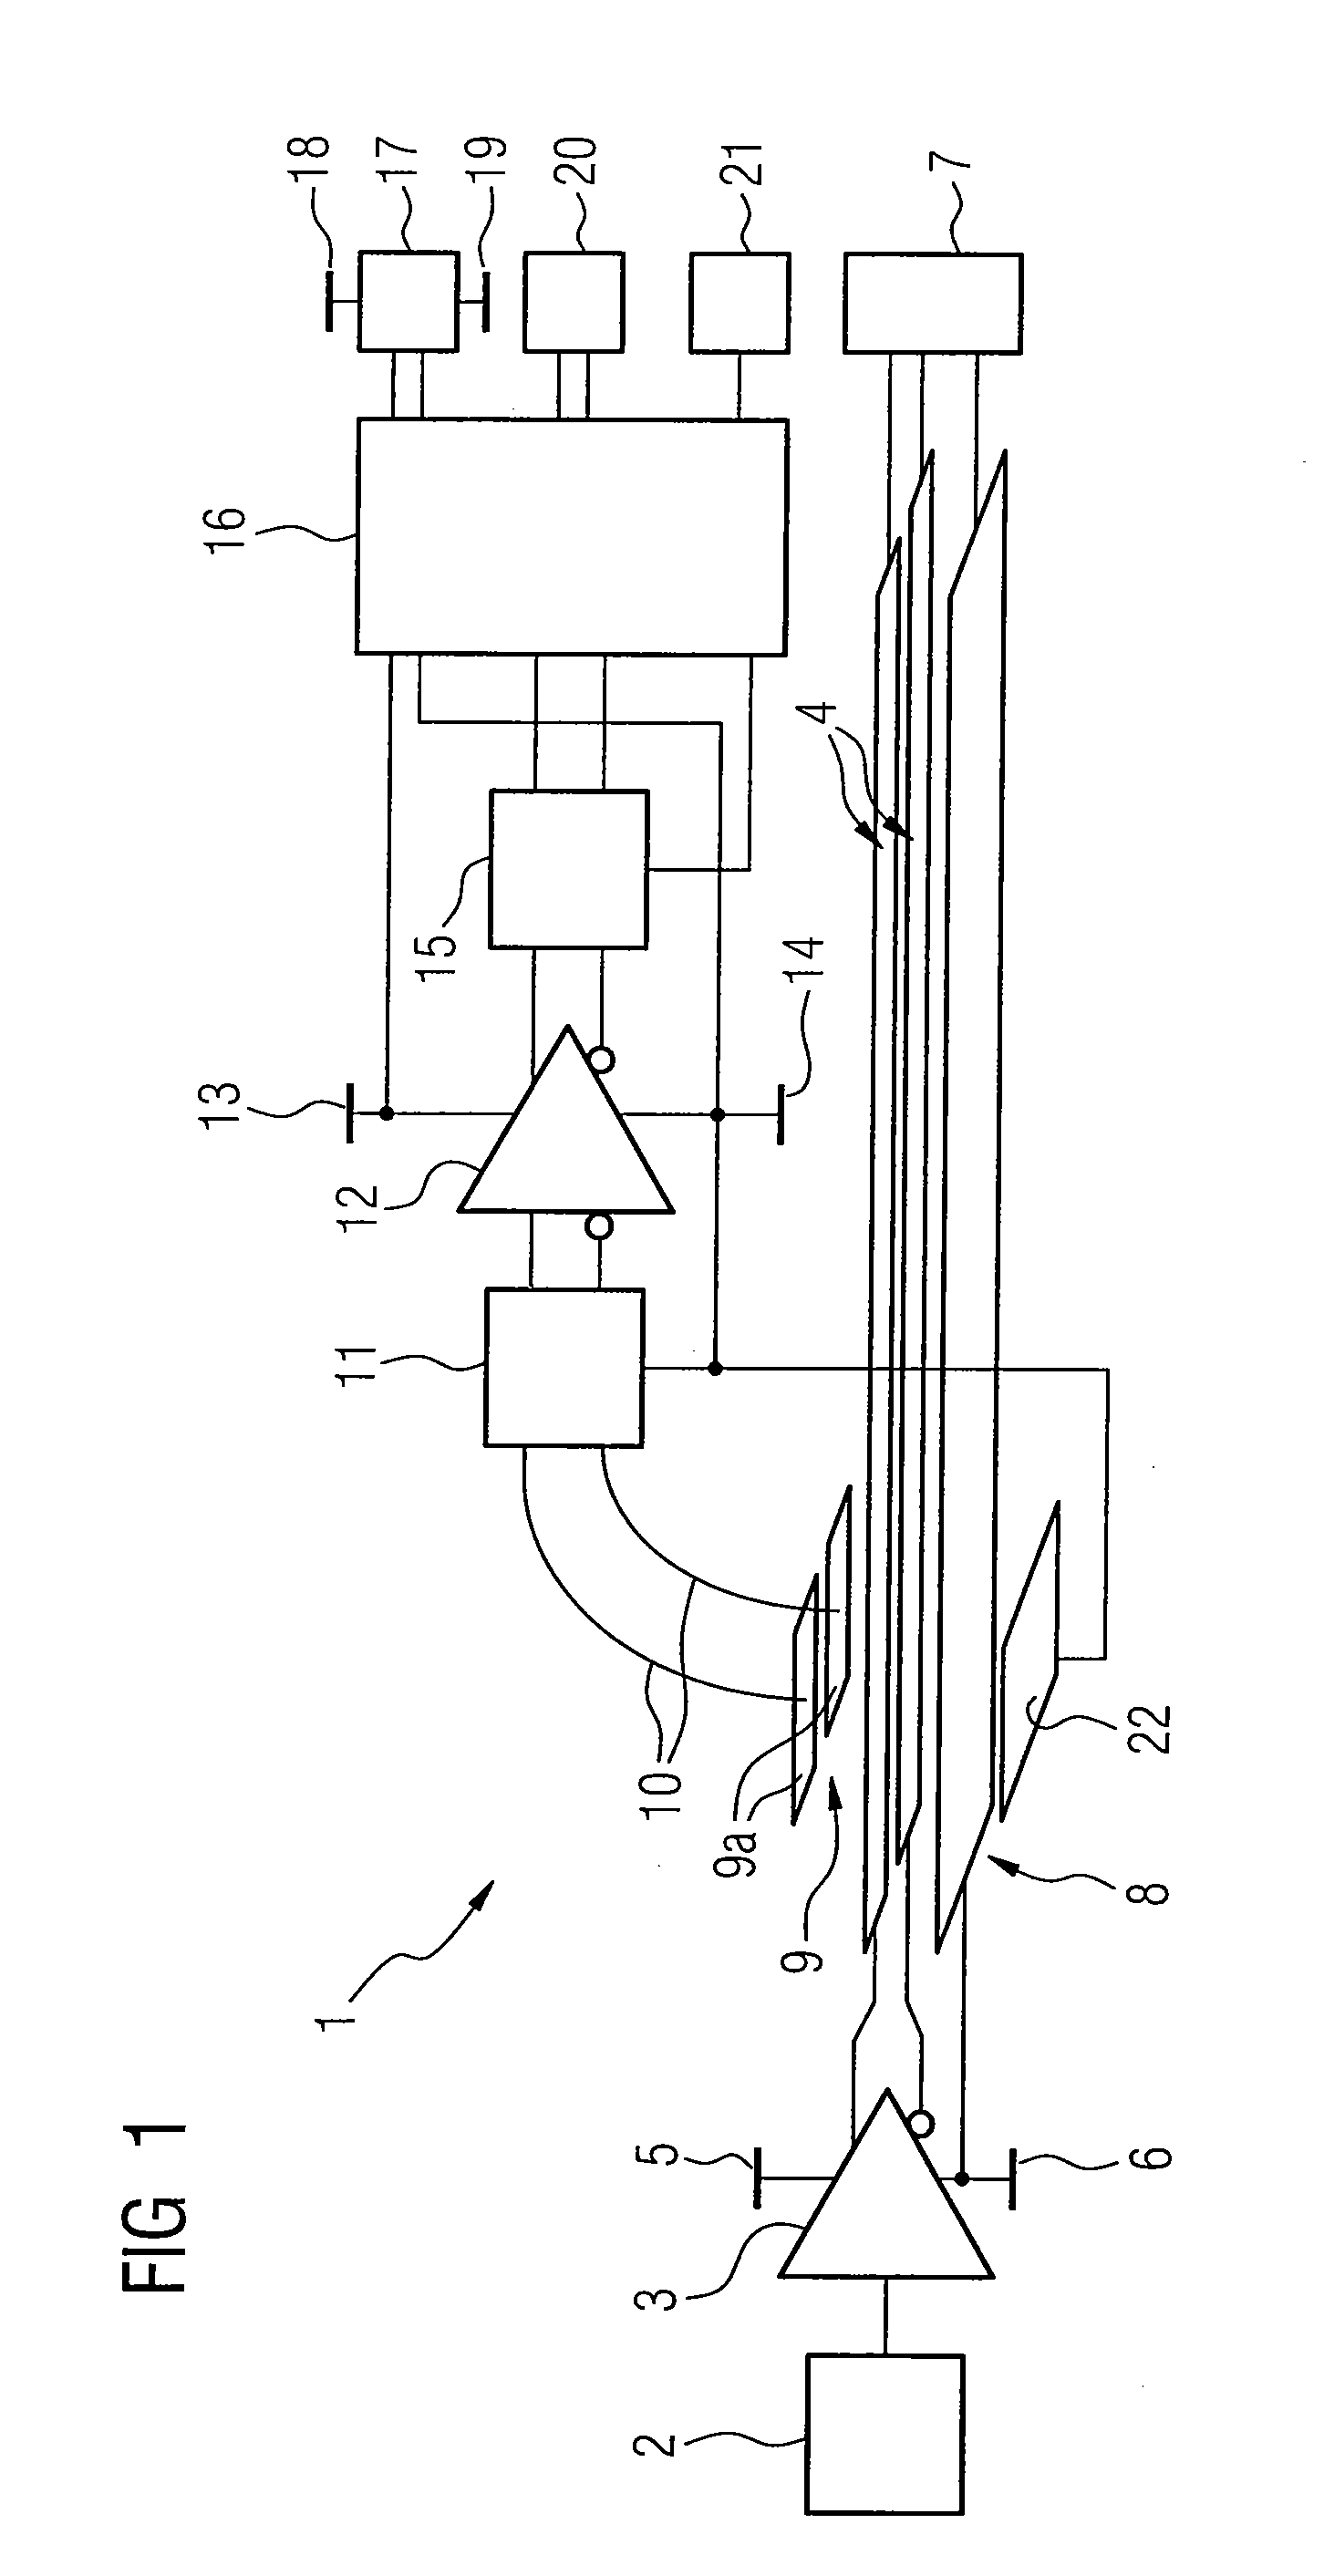 Contactless transmission of a differential signal between a transmitter and a receiver